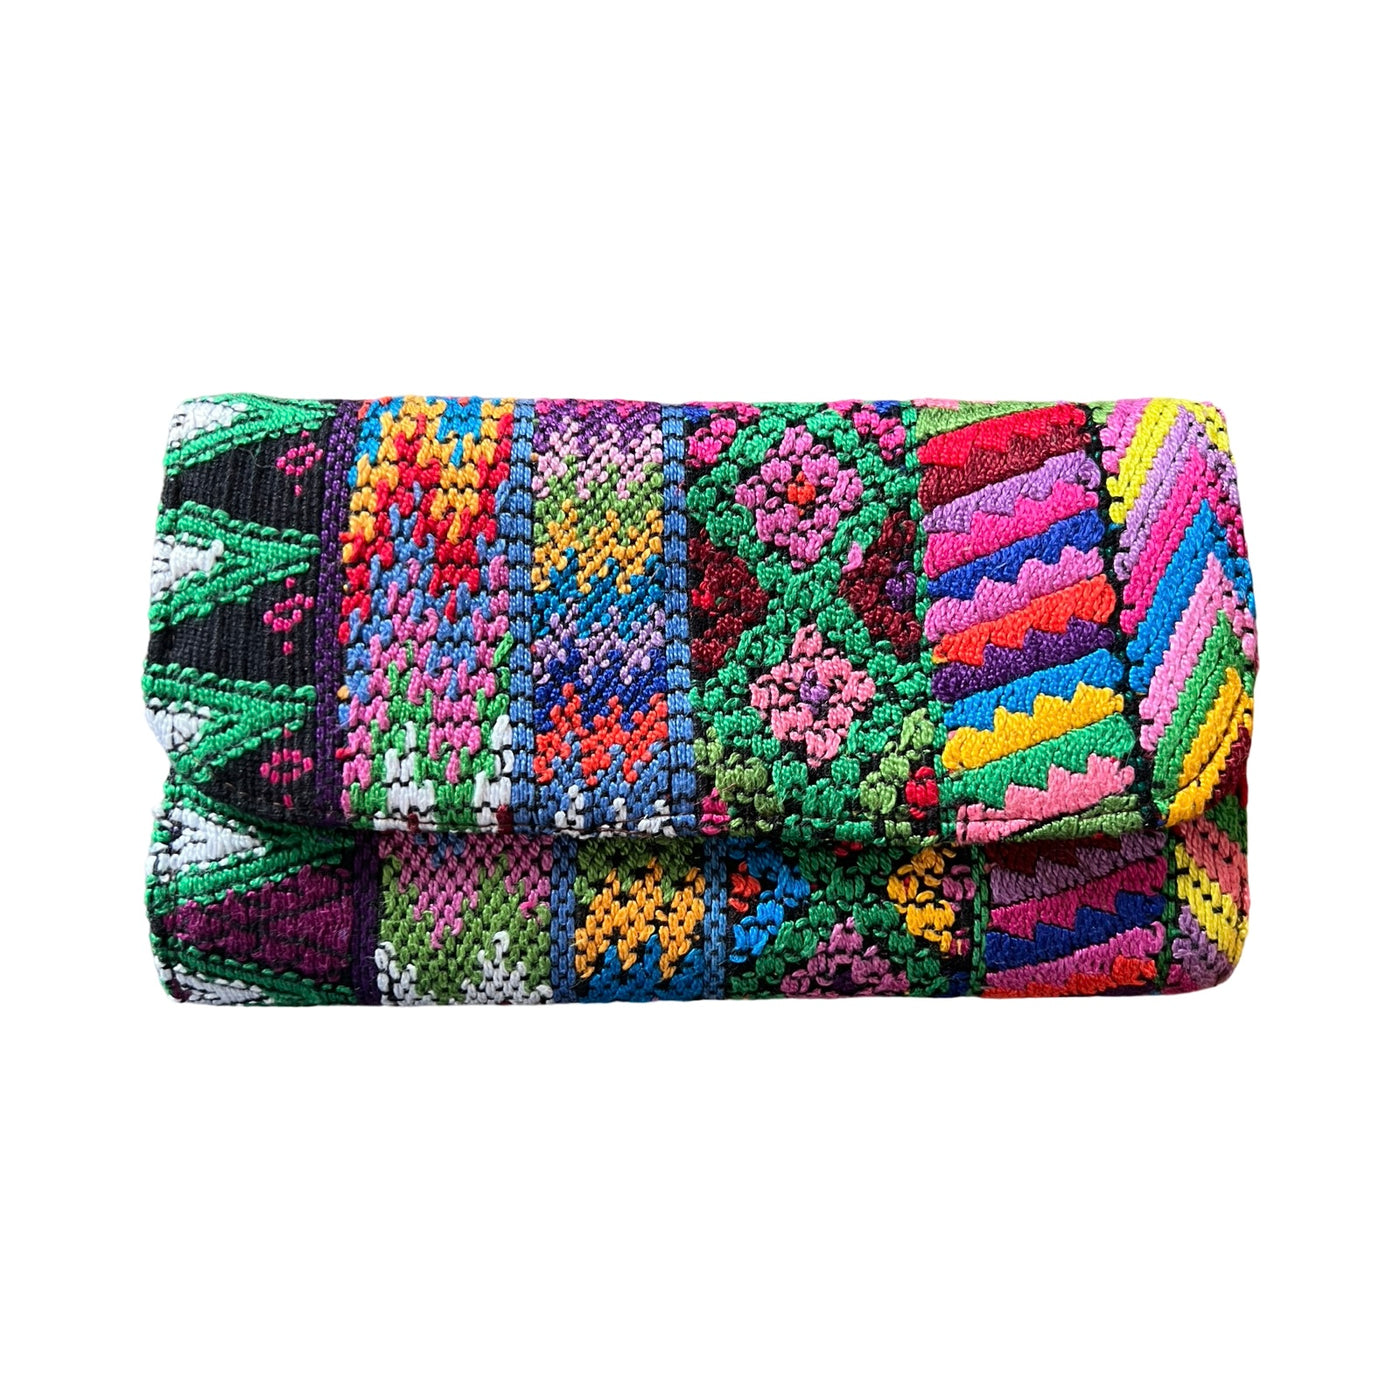 huipil wallet with a multi-color design of stripes, arrows and flowers.